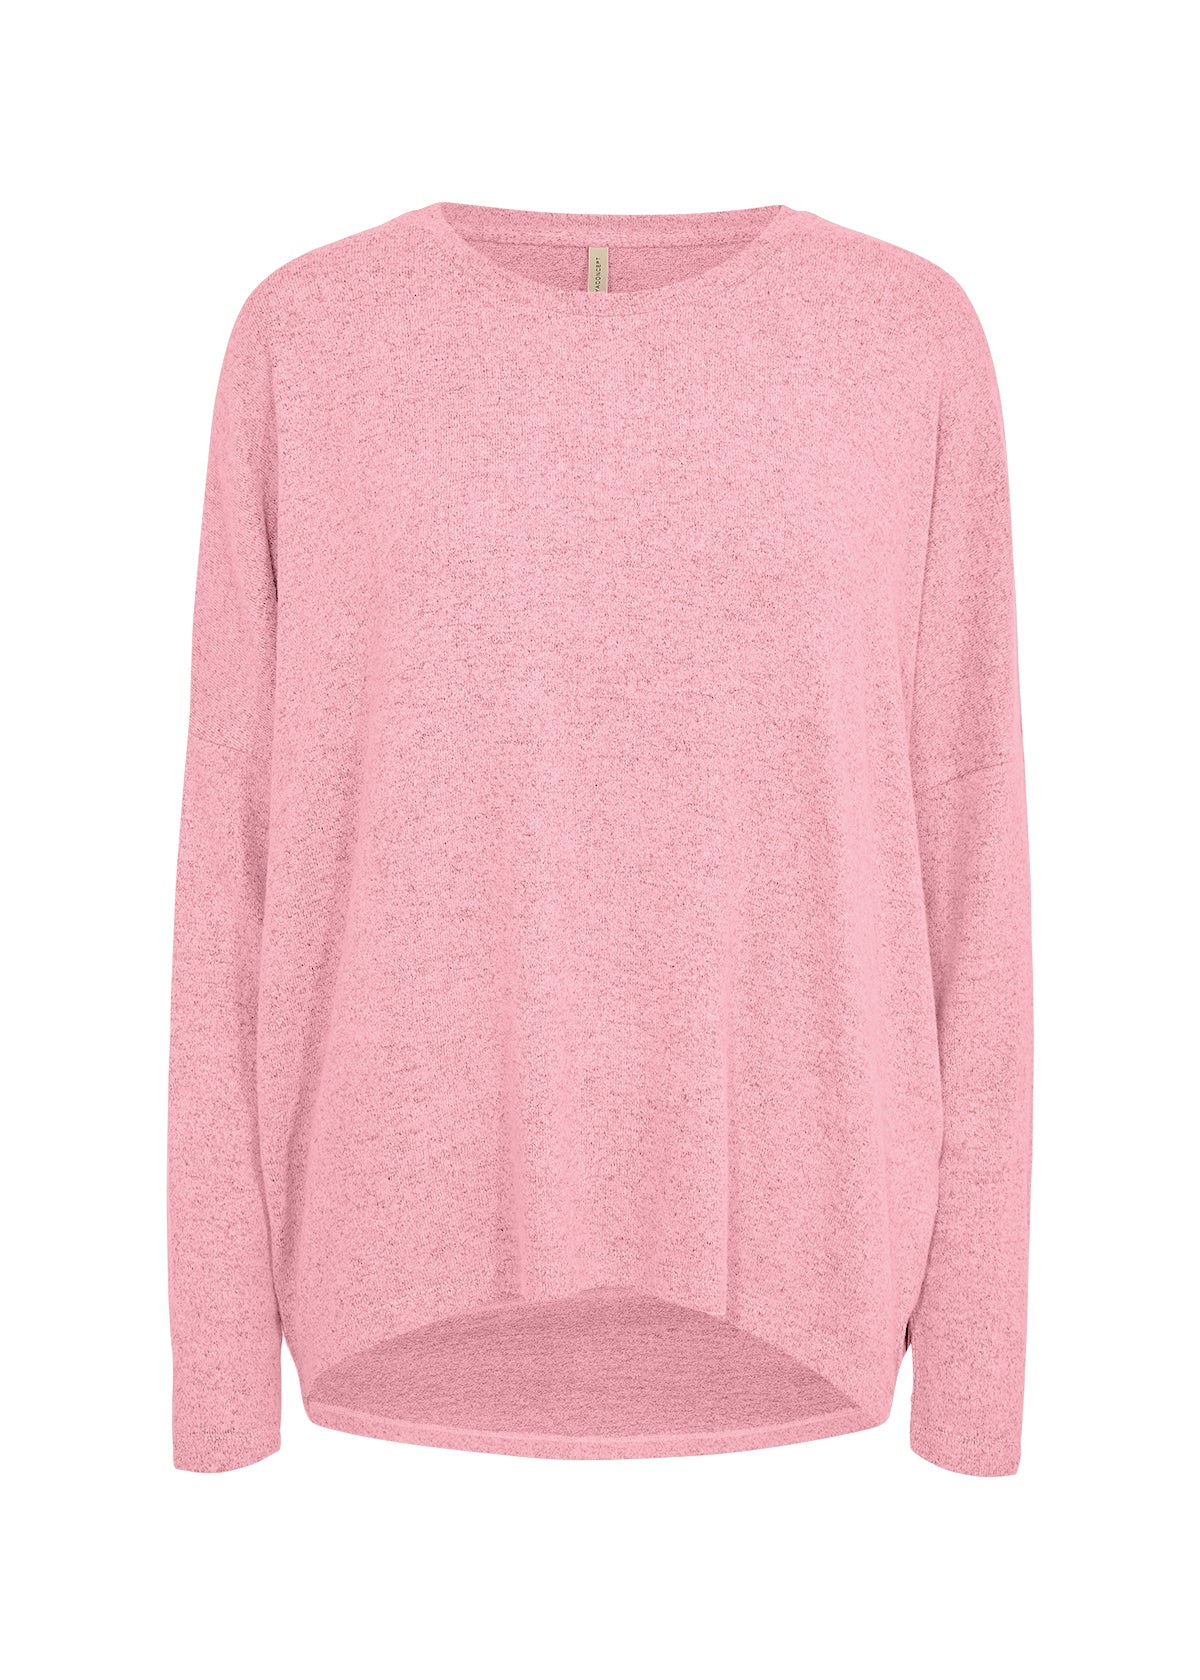 Soya Concept Sweater 24788-PINK